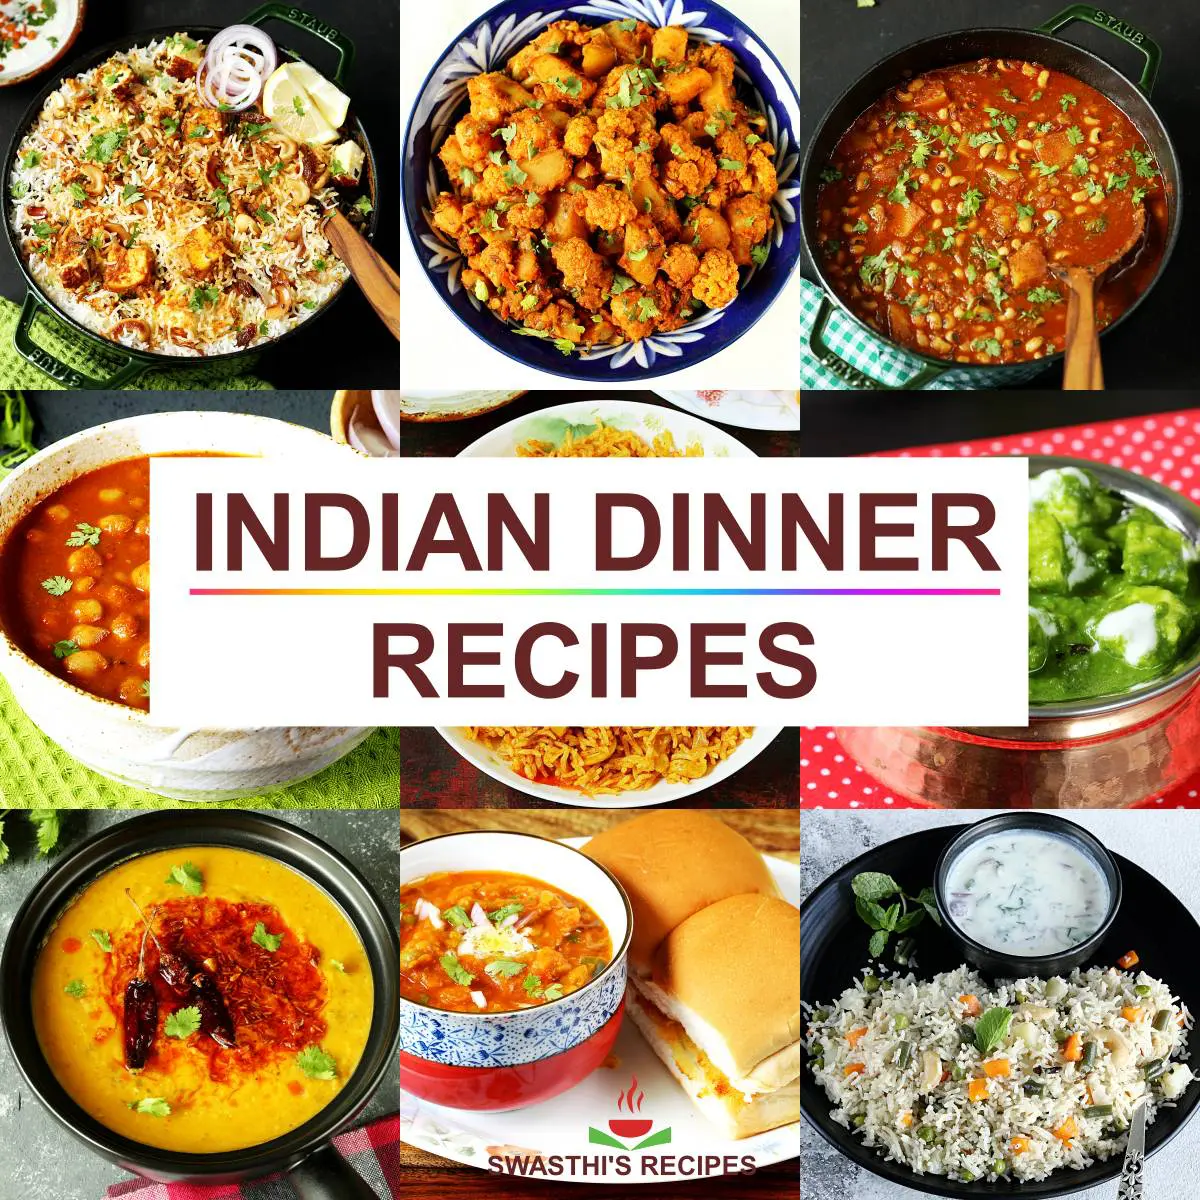 Over 100 Easy Recipes You Can Create!